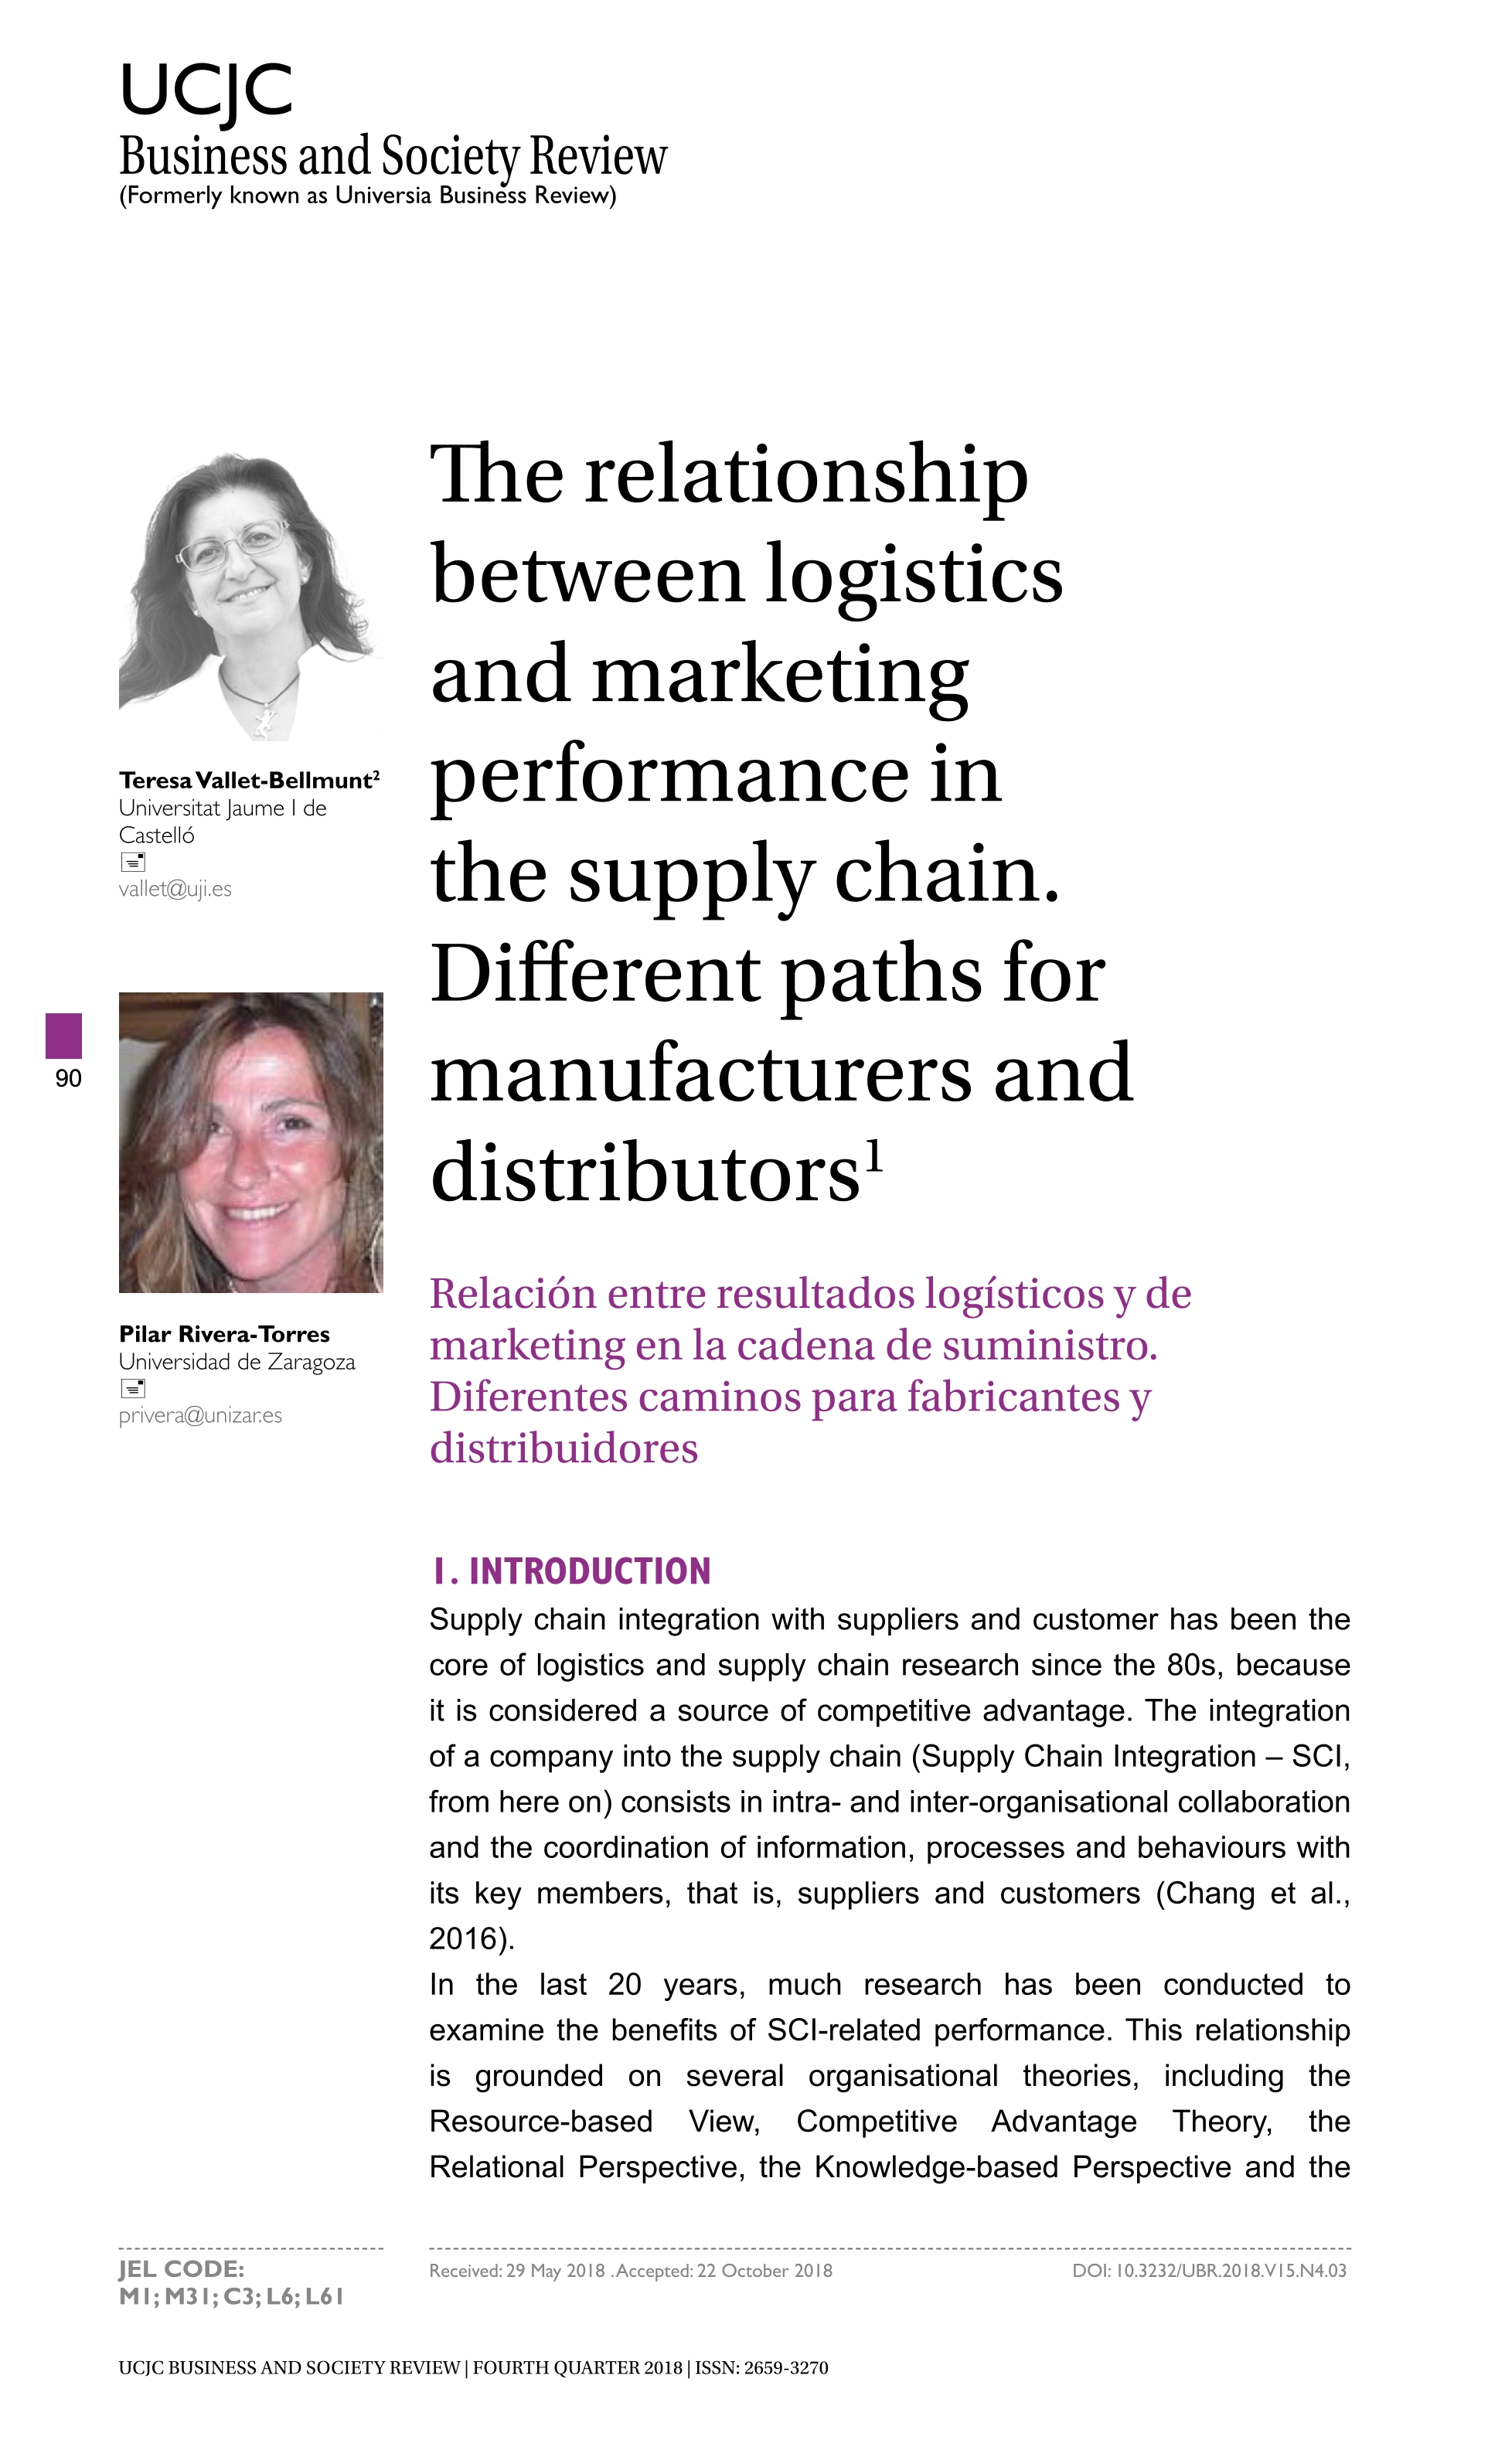 The relationship between logistics and marketing performance in the supply chain. Different paths for manufacturers and distributors